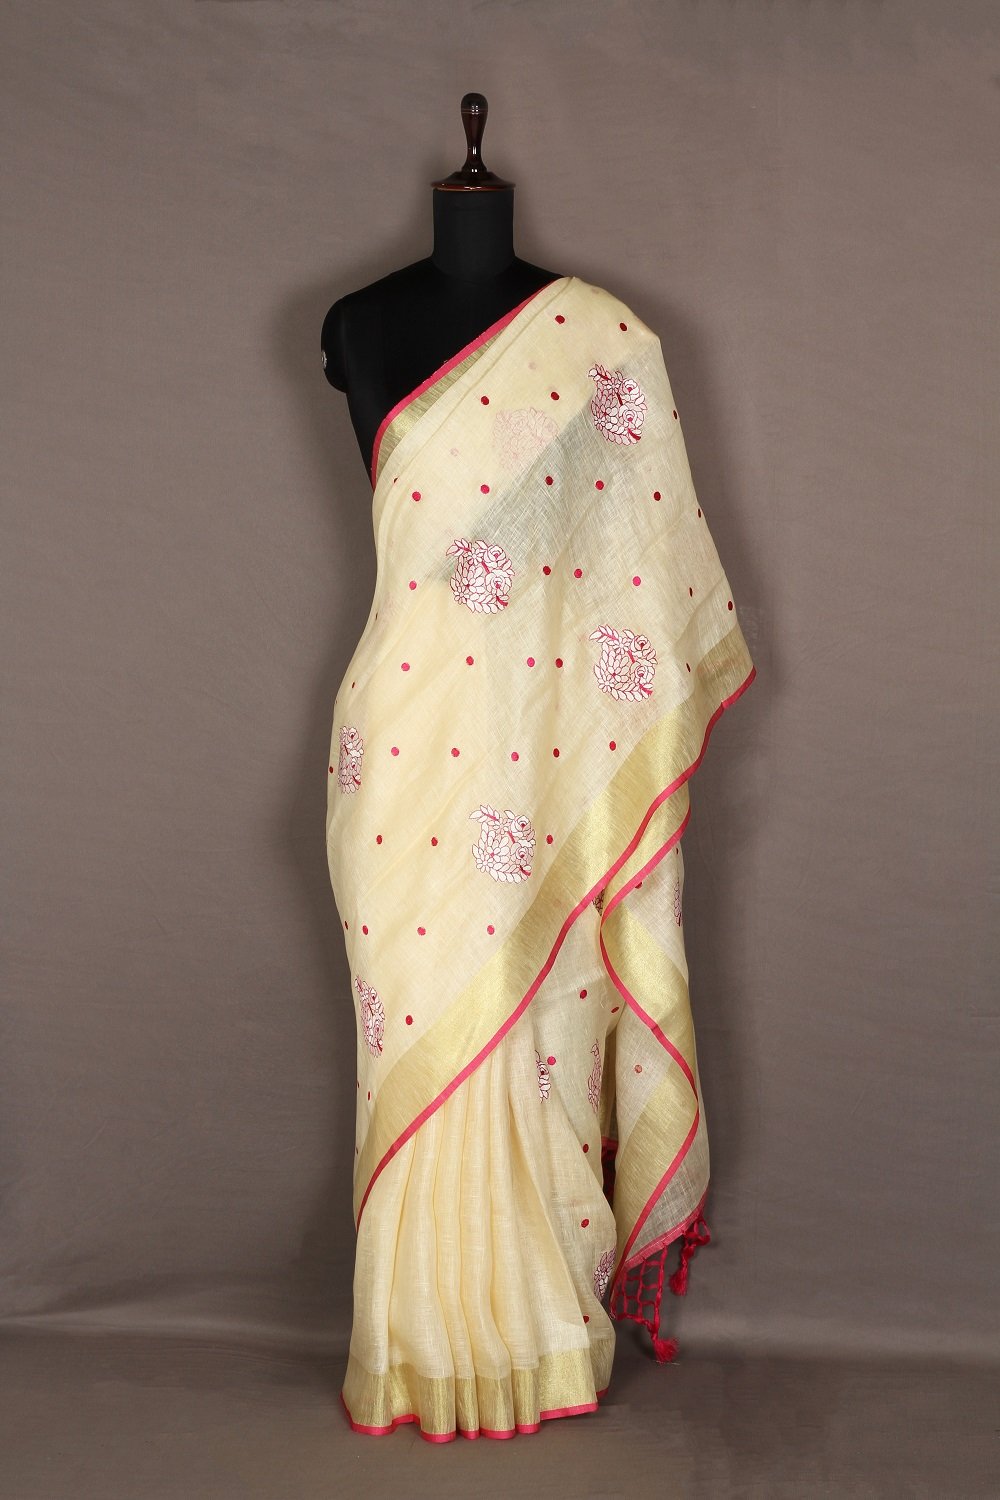 Cream shade Handwoven Organic Linen Saree with Floral Embroidery | KIHUMS Saree